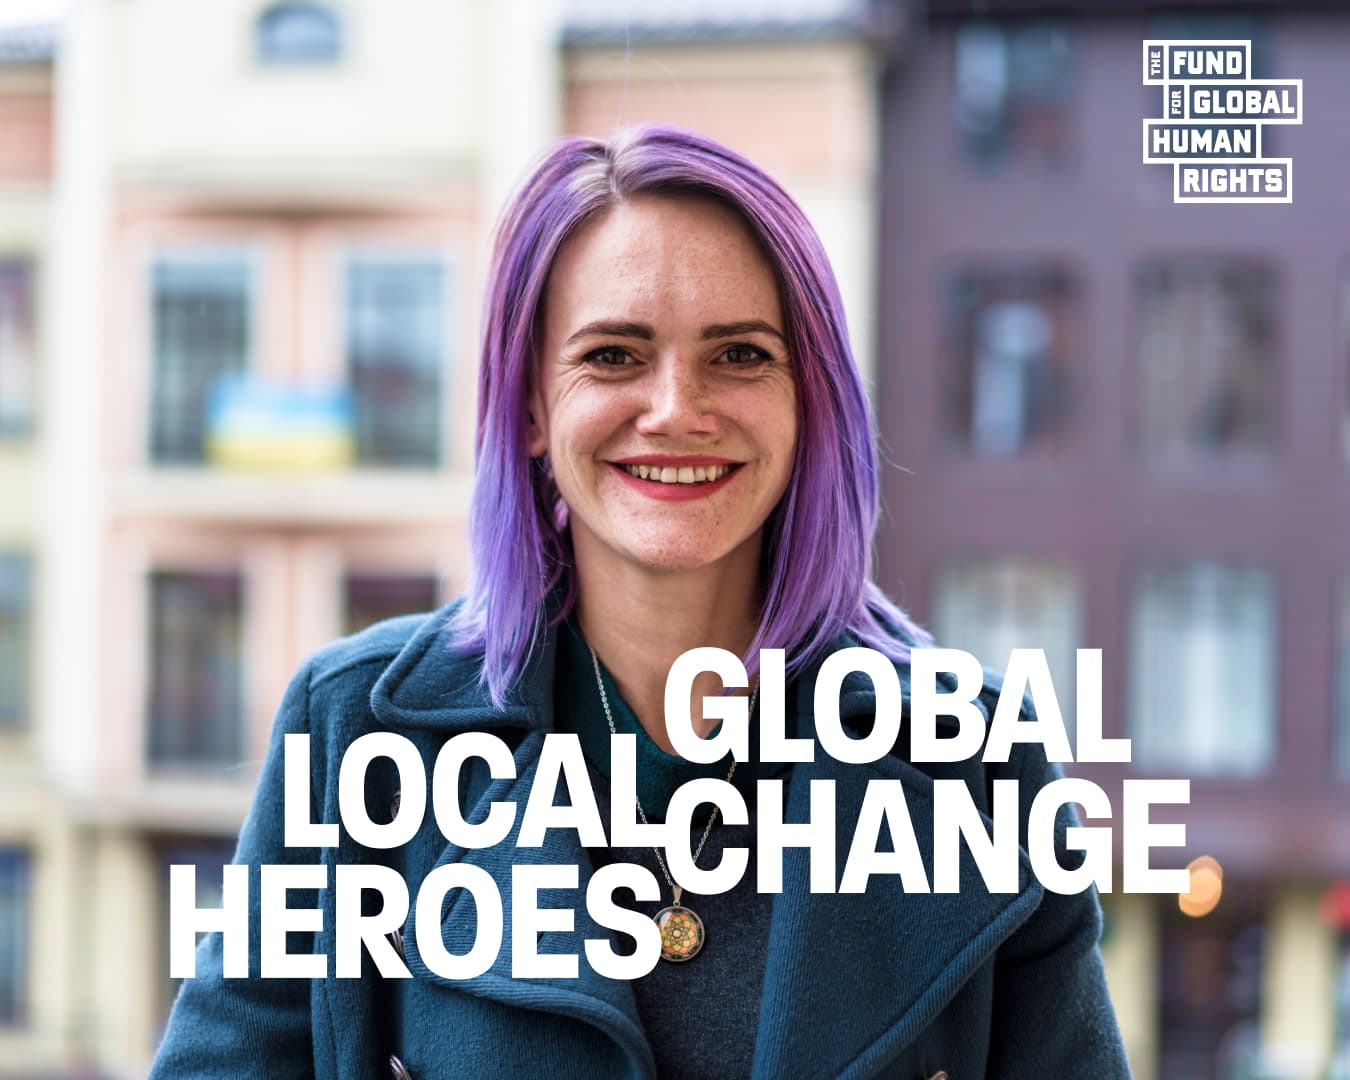 The Fund Launches #LocalHeroesGlobalChange